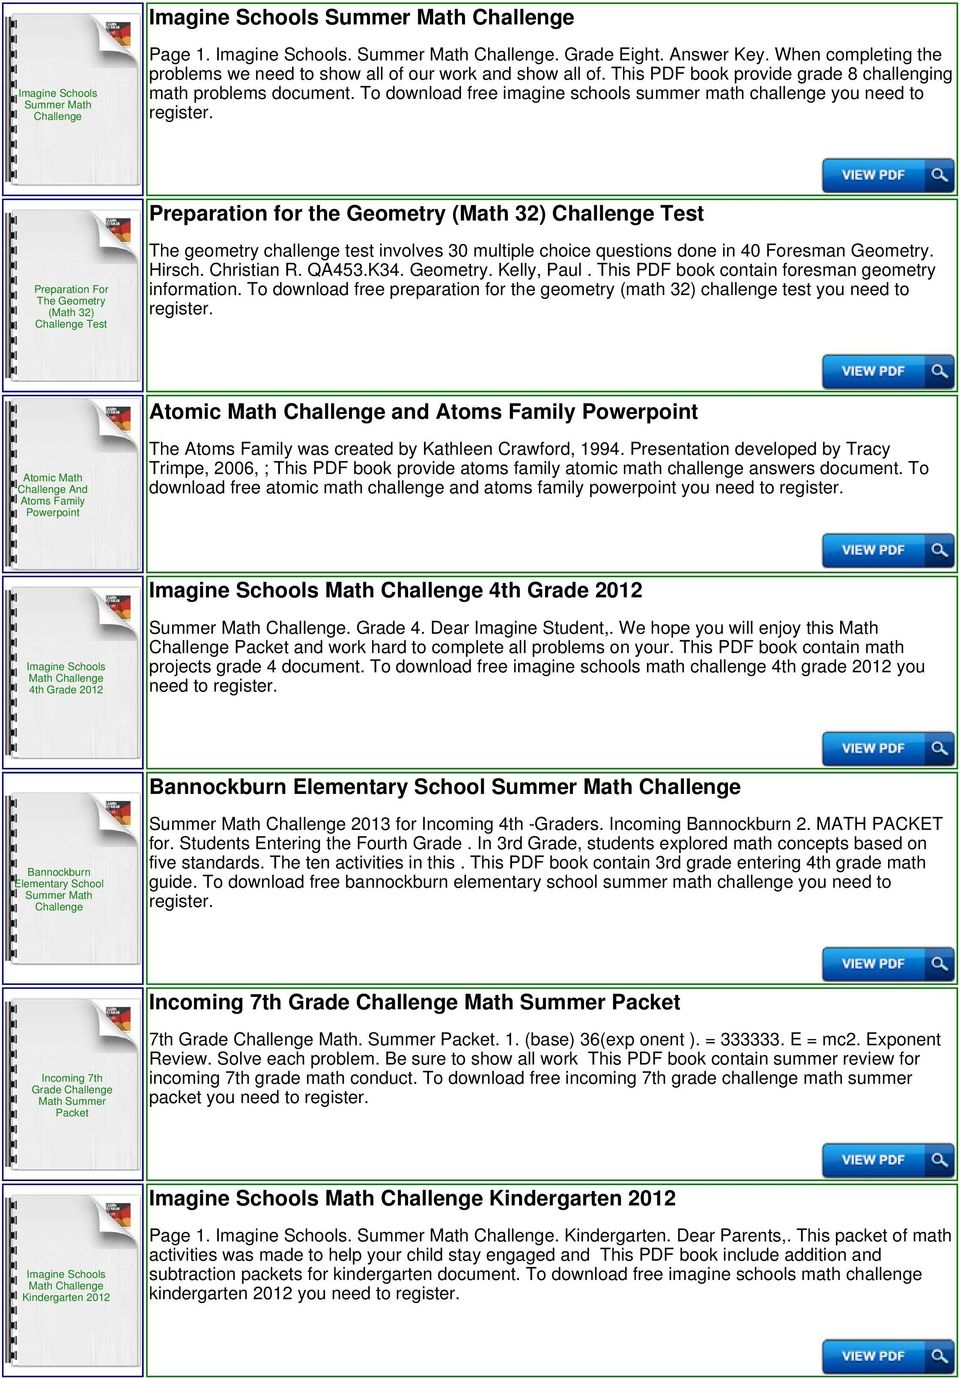 To download free imagine schools summer math challenge you need to Preparation for the Geometry (Math 32) Test Preparation For The Geometry (Math 32) Test The geometry challenge test involves 30